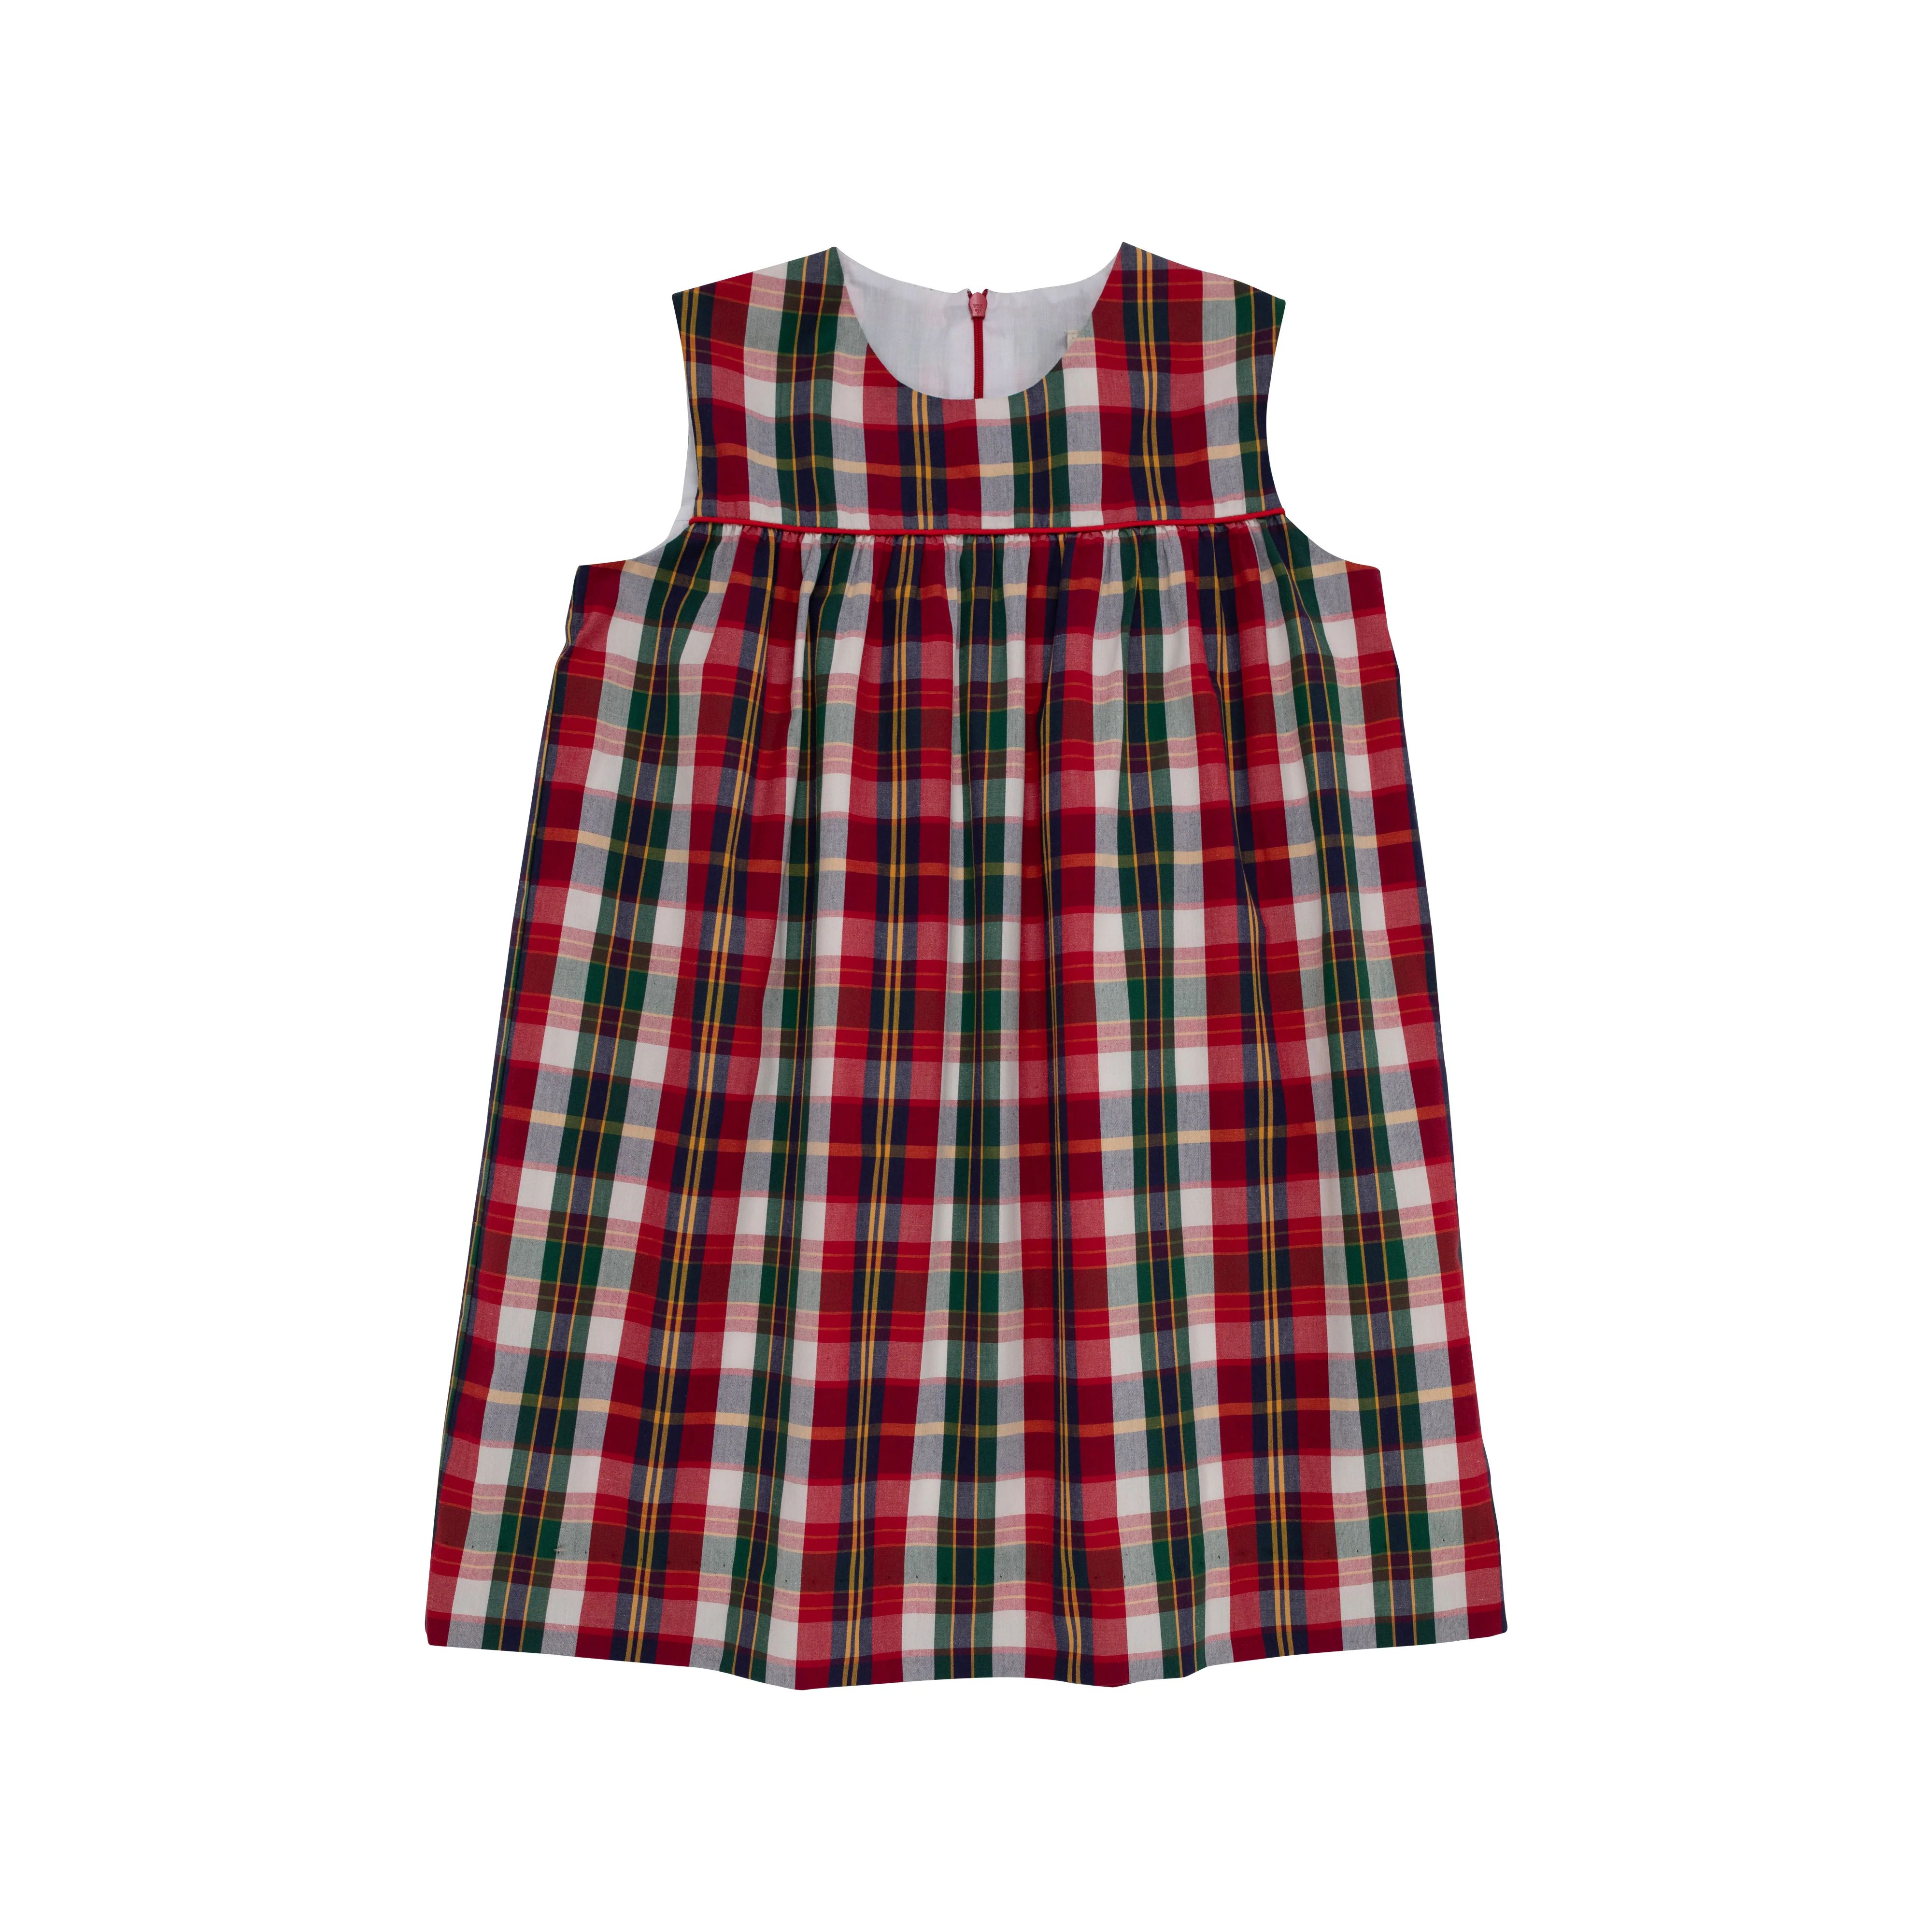 Sleeveless McFerran Frock - Chastain Park Plaid with Richmond Red Picot | The Beaufort Bonnet Company